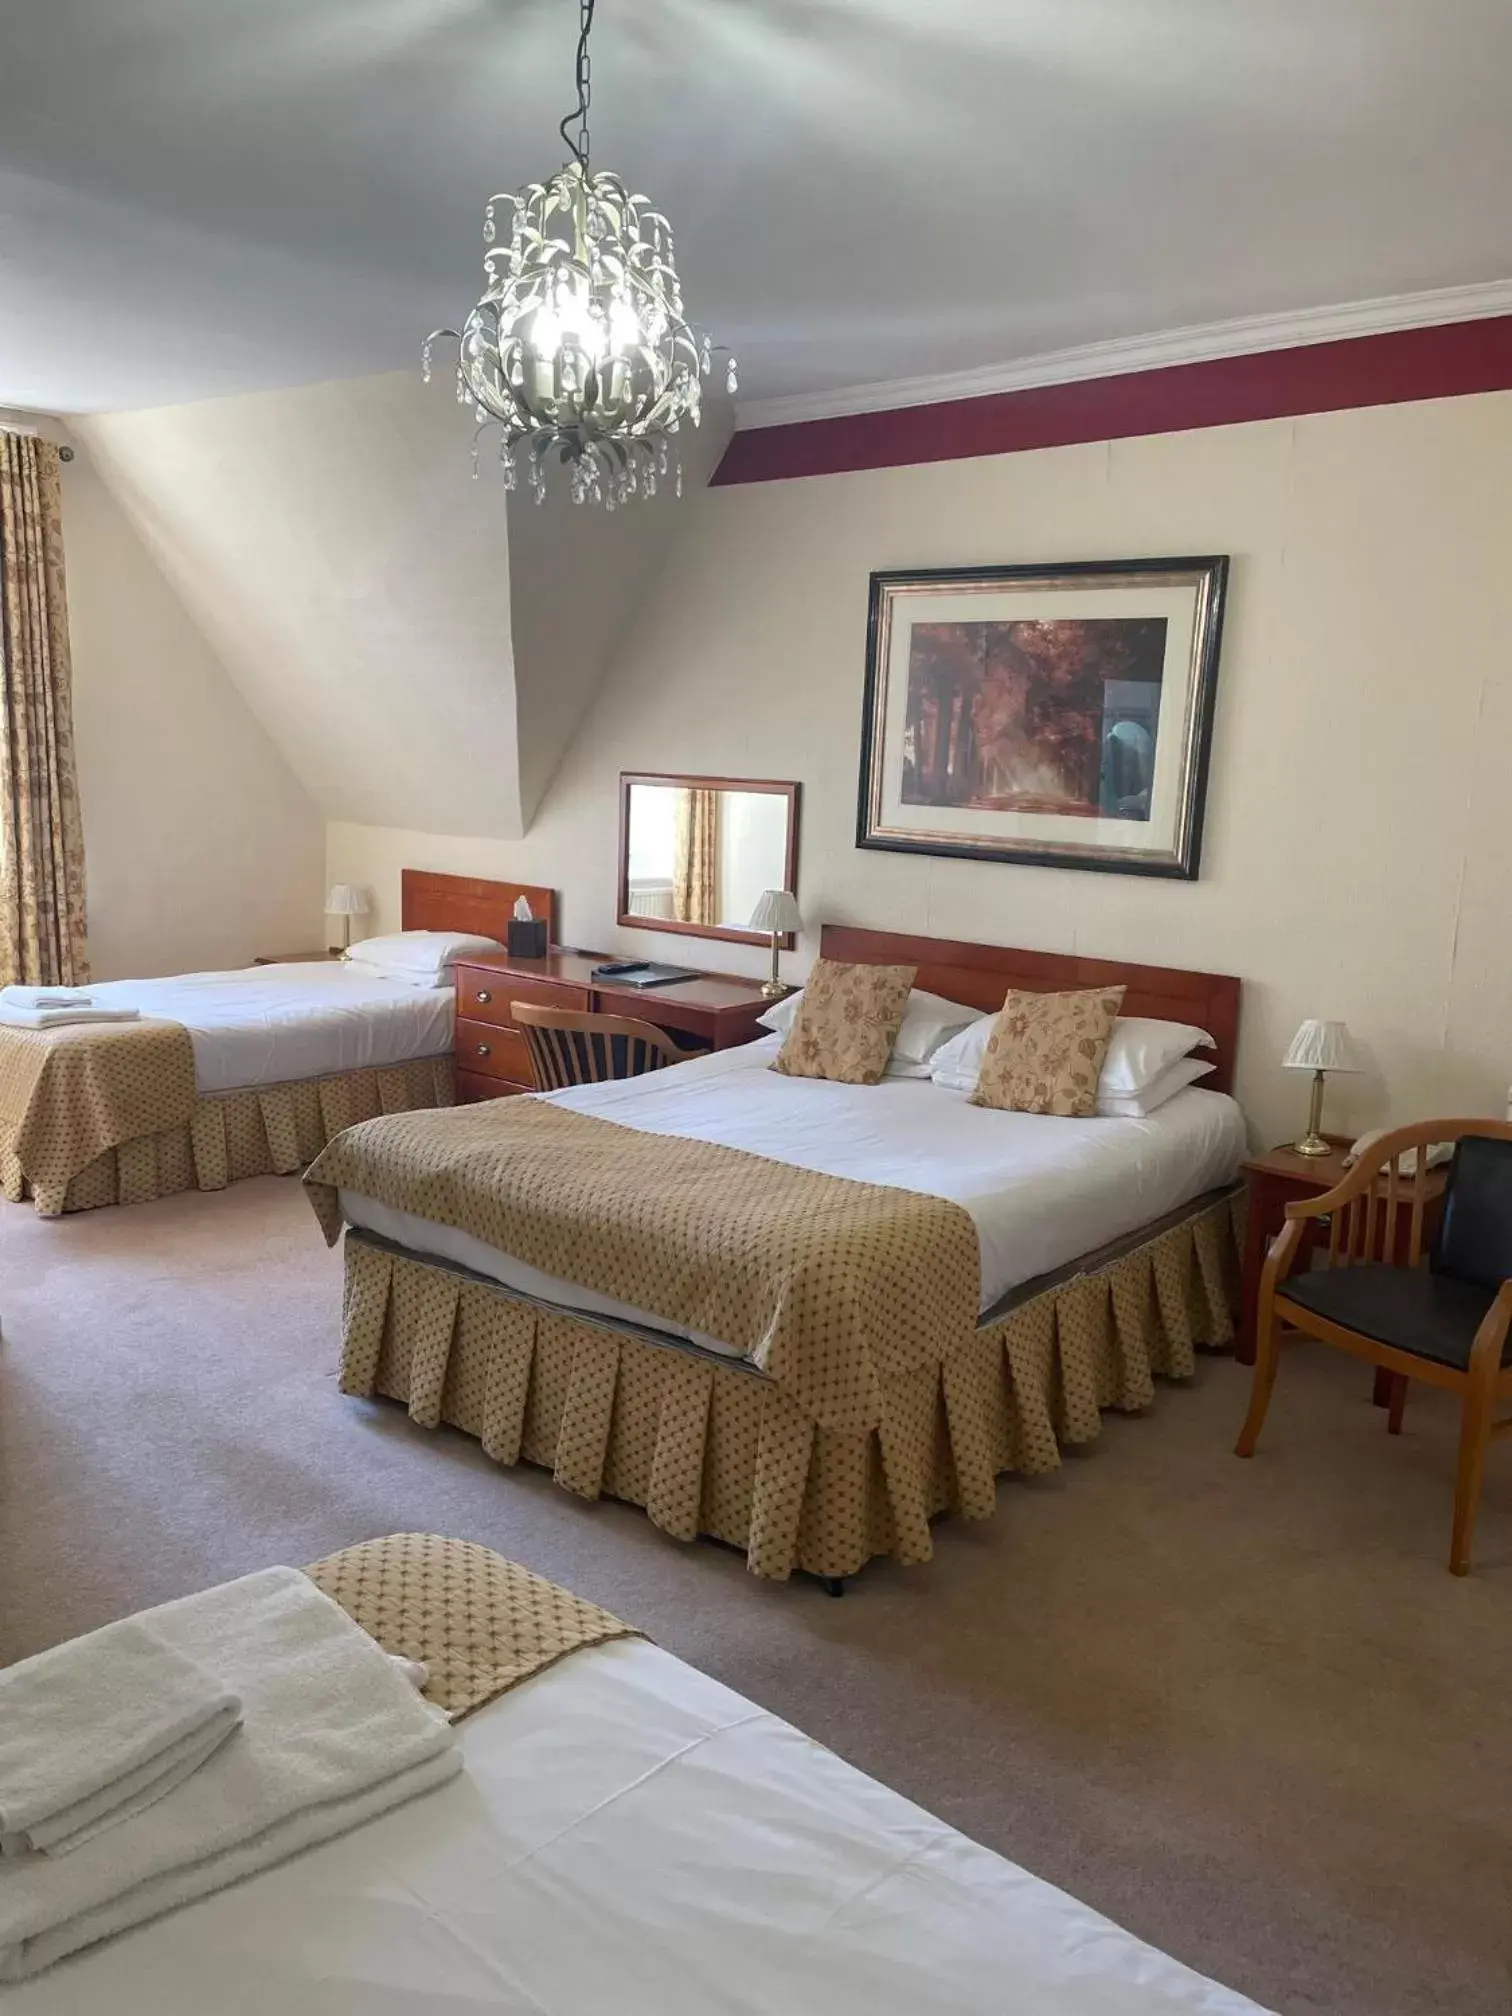 Deluxe Quadruple Room in Ebury Hotel Cottages and Apartment's